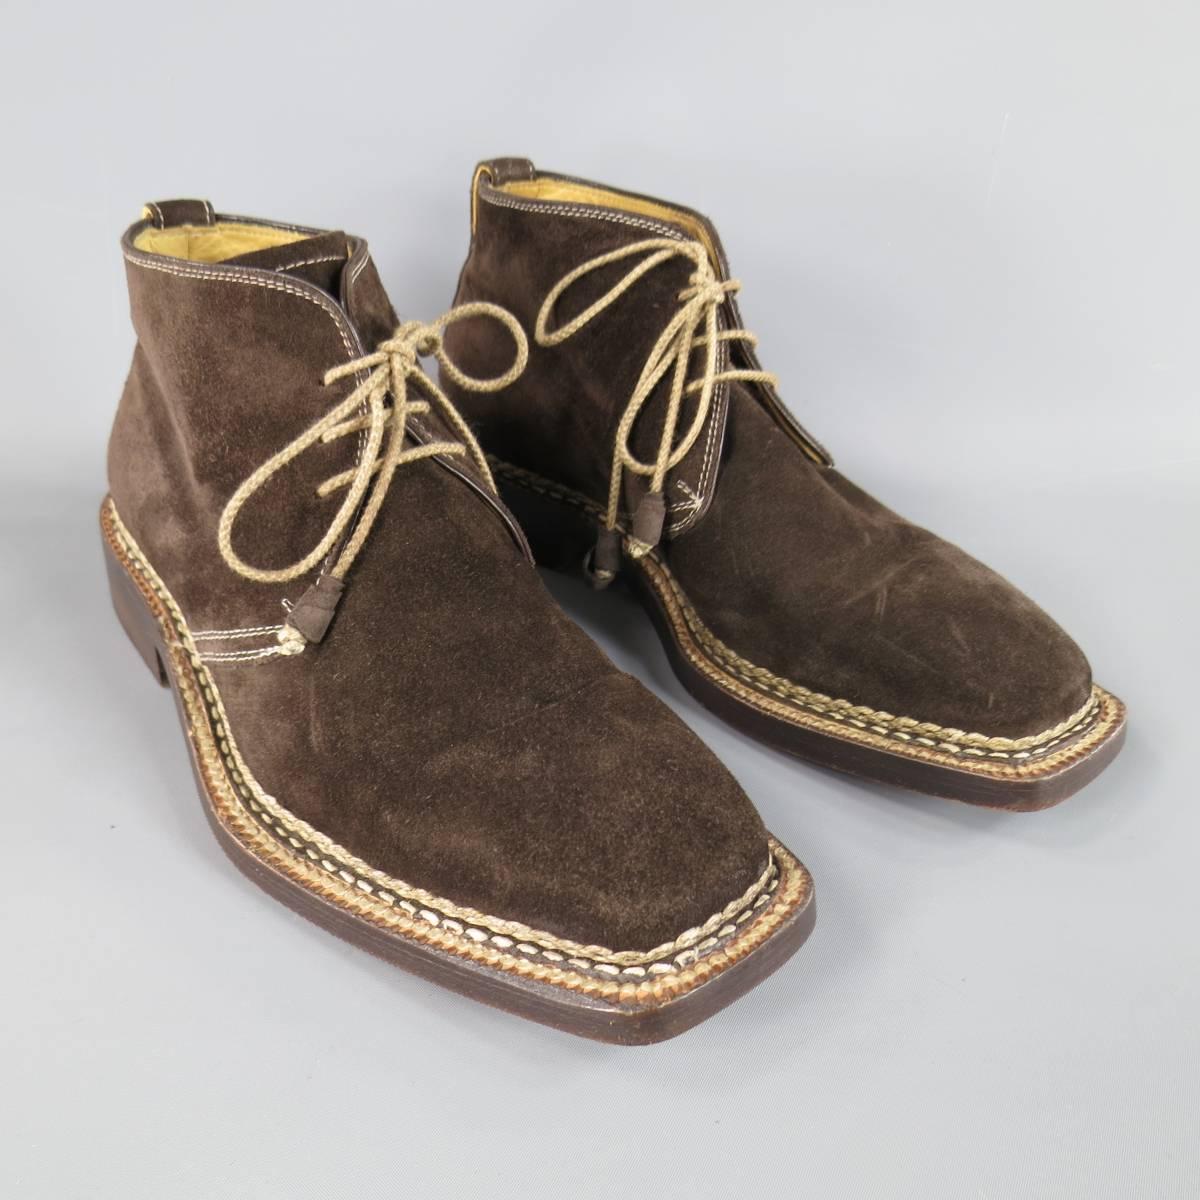 BETTANIN & VENTURI chukka dress boots in rich brown suede with a square toe, leather ended laces, and contrast stitching throughout. Made in Italy.
Retails at$1575.00

Good Pre-Owned Condition.
 
Outsole:  11.65 x 4.5 in.
Height: 5 in.